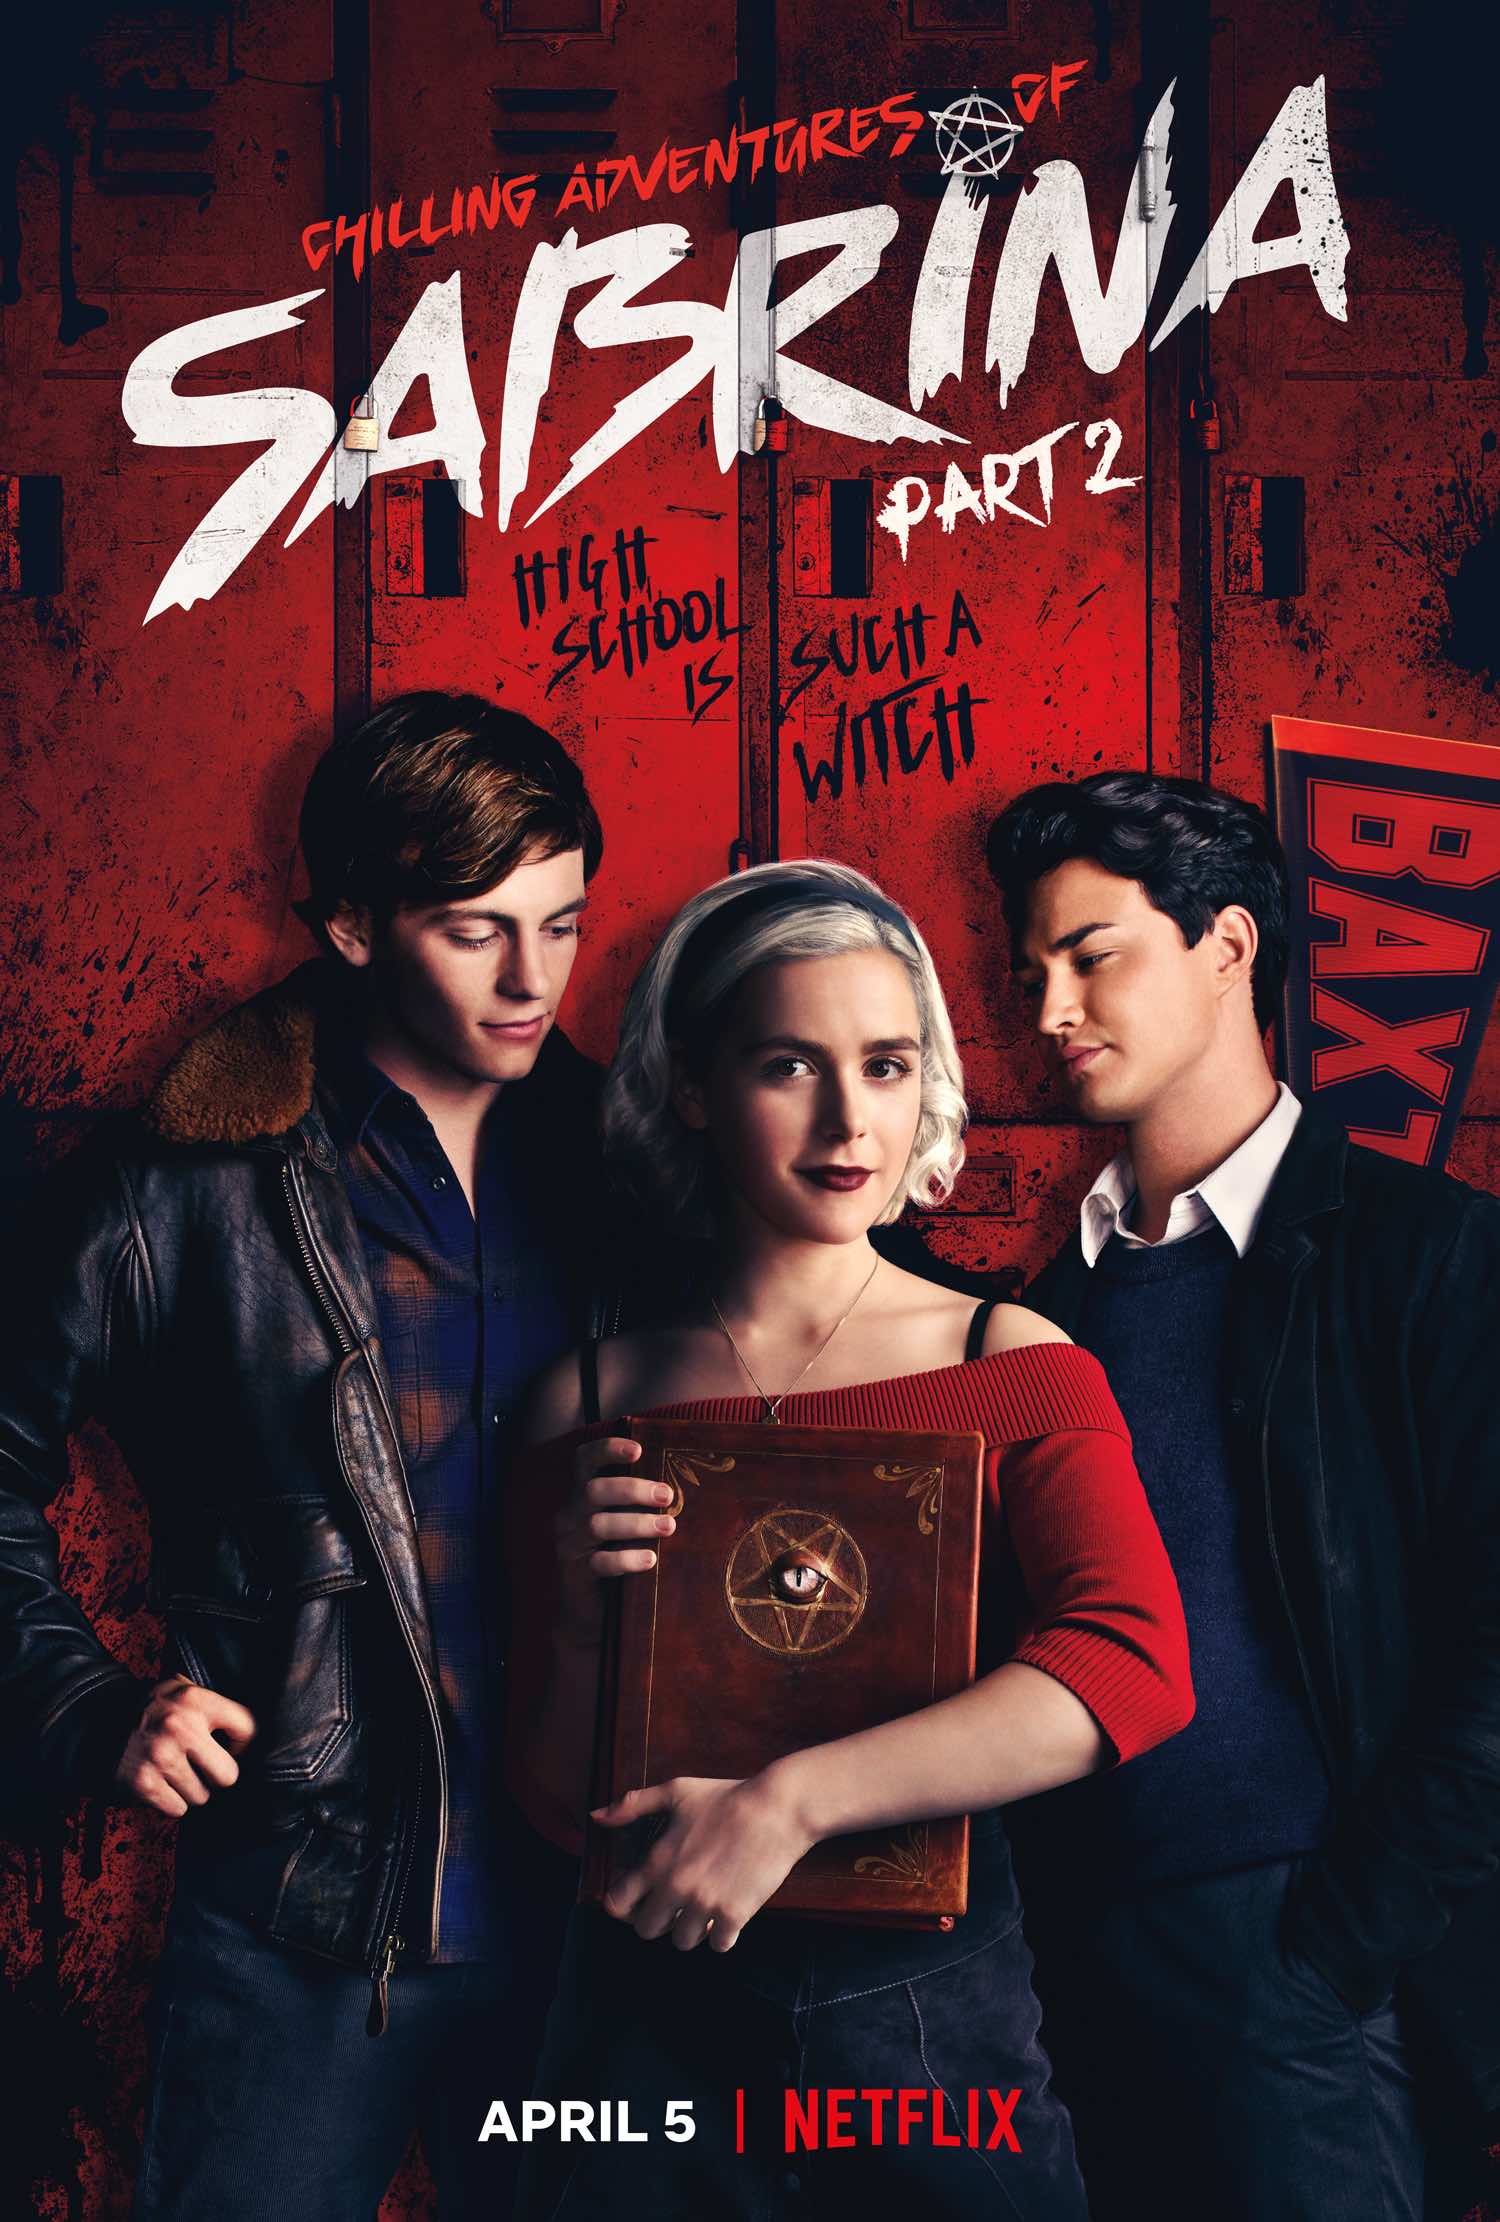 To get you excited for the second part of the Netflix series, we’ve conjured up everything you need to fall in love with 'Chilling Adventures of Sabrina'.